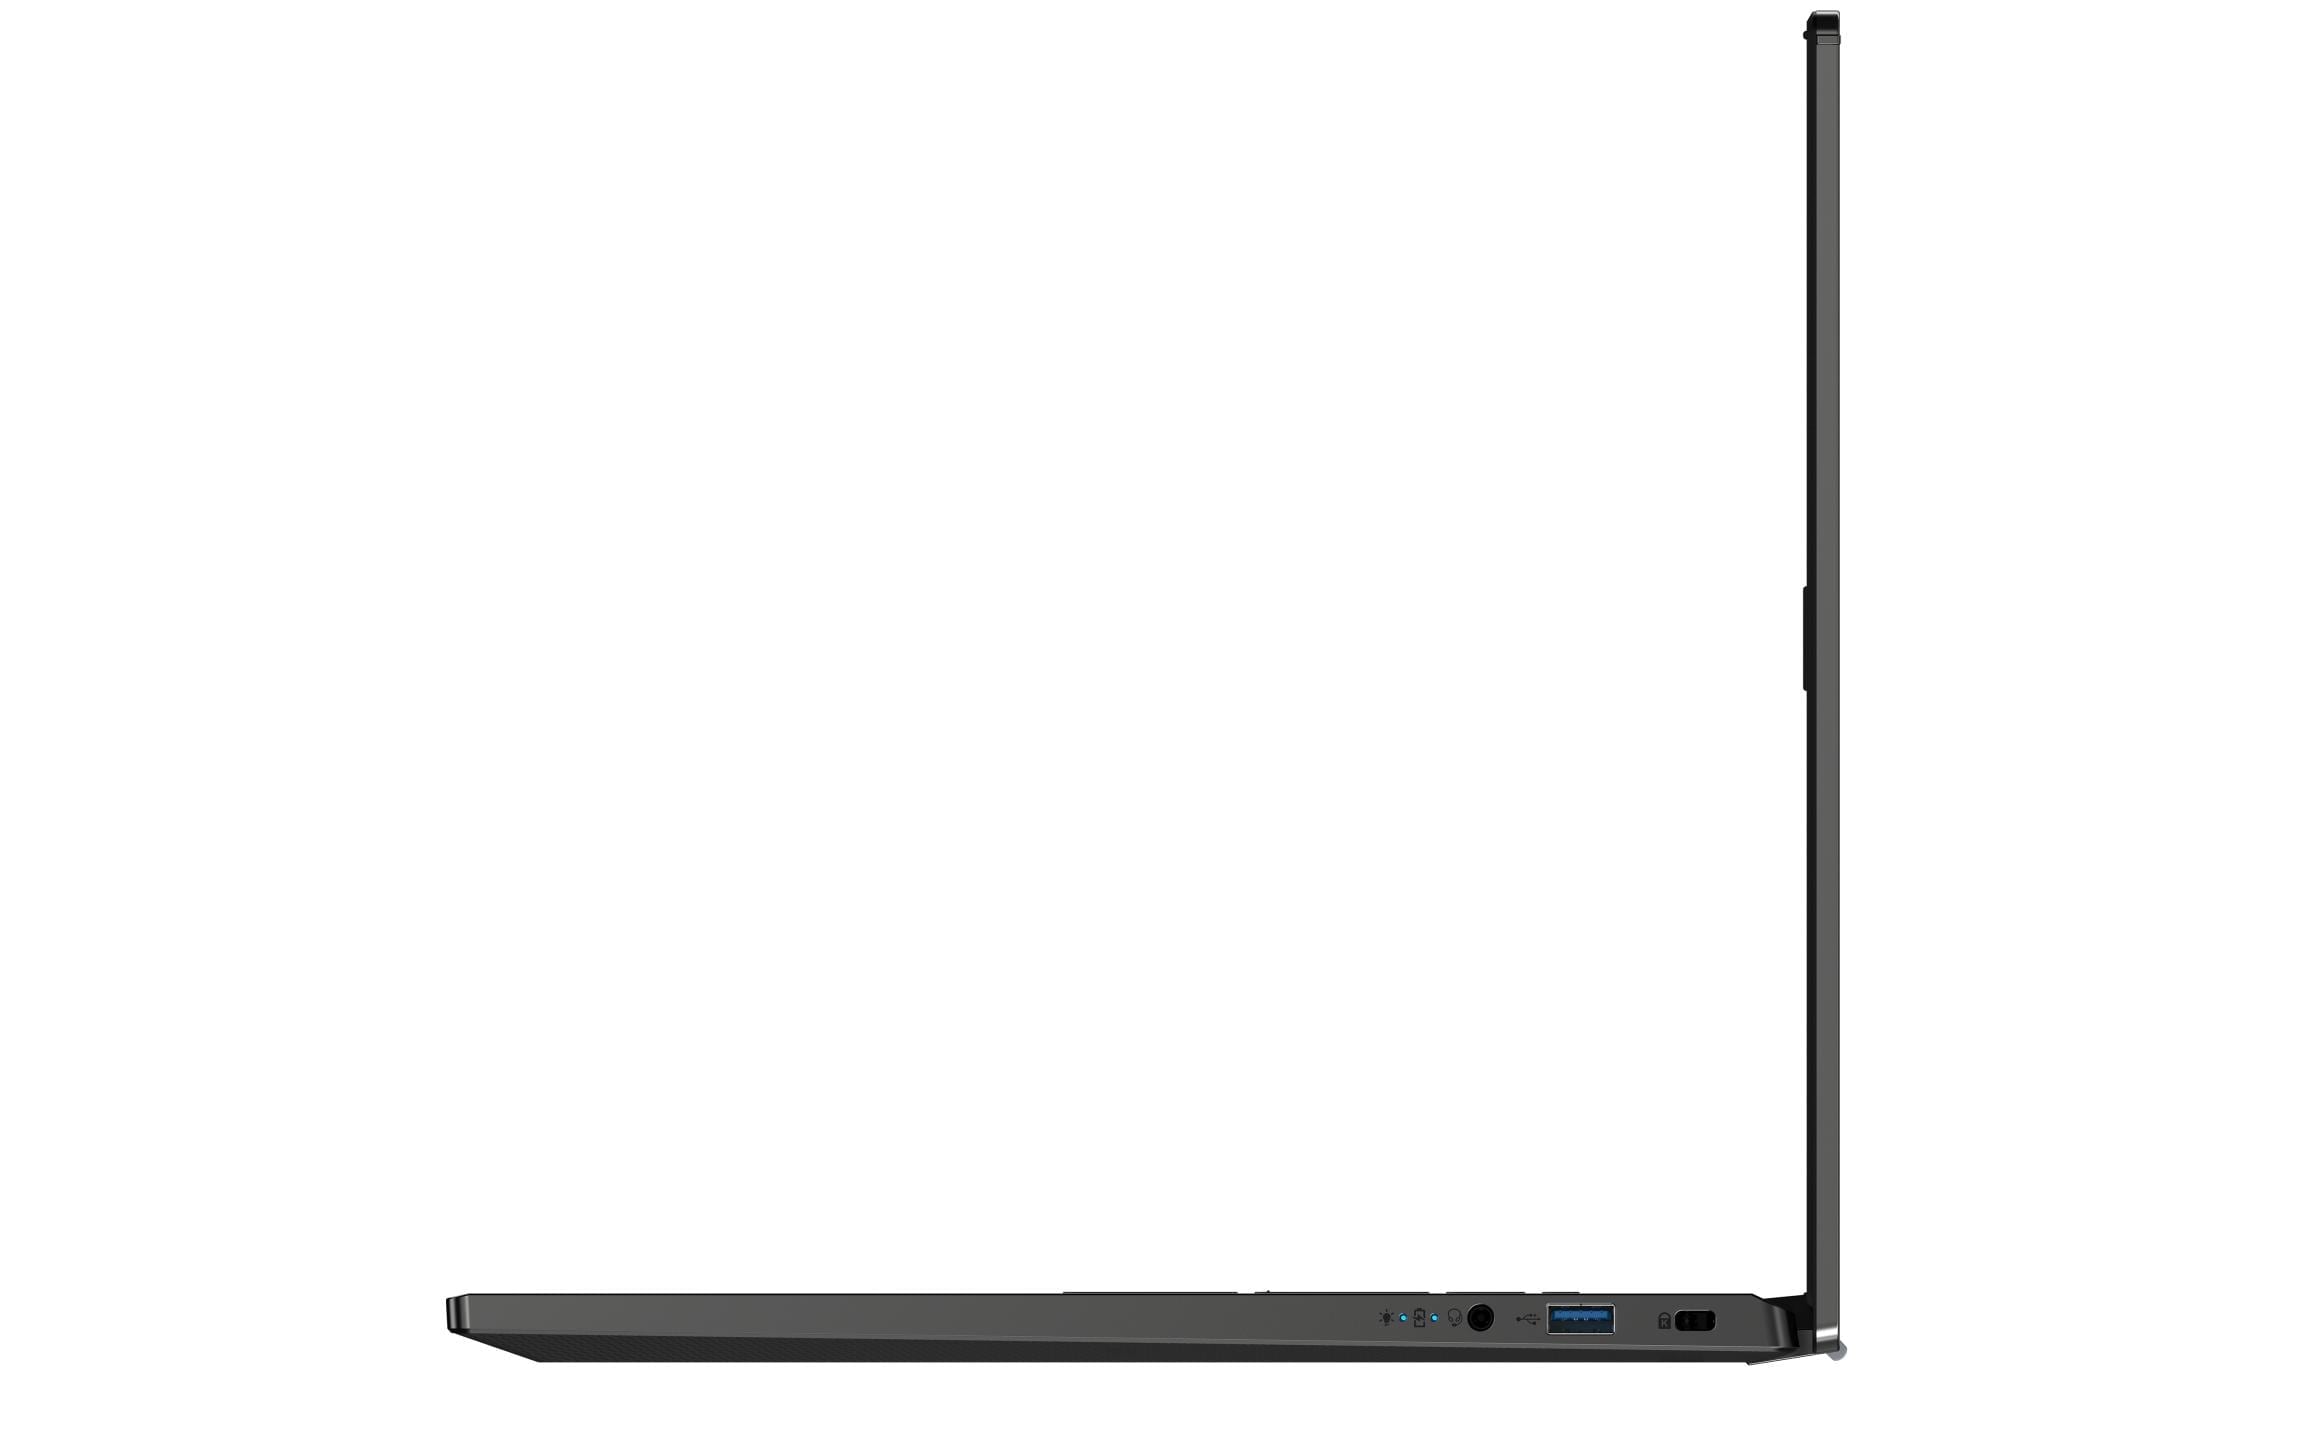 Acer Notebook »Aspire 5 17 A517-58G«, 43,77 cm, / 17,3 Zoll, Intel, Core i7, GeForce RTX 2050, 1000 GB SSD